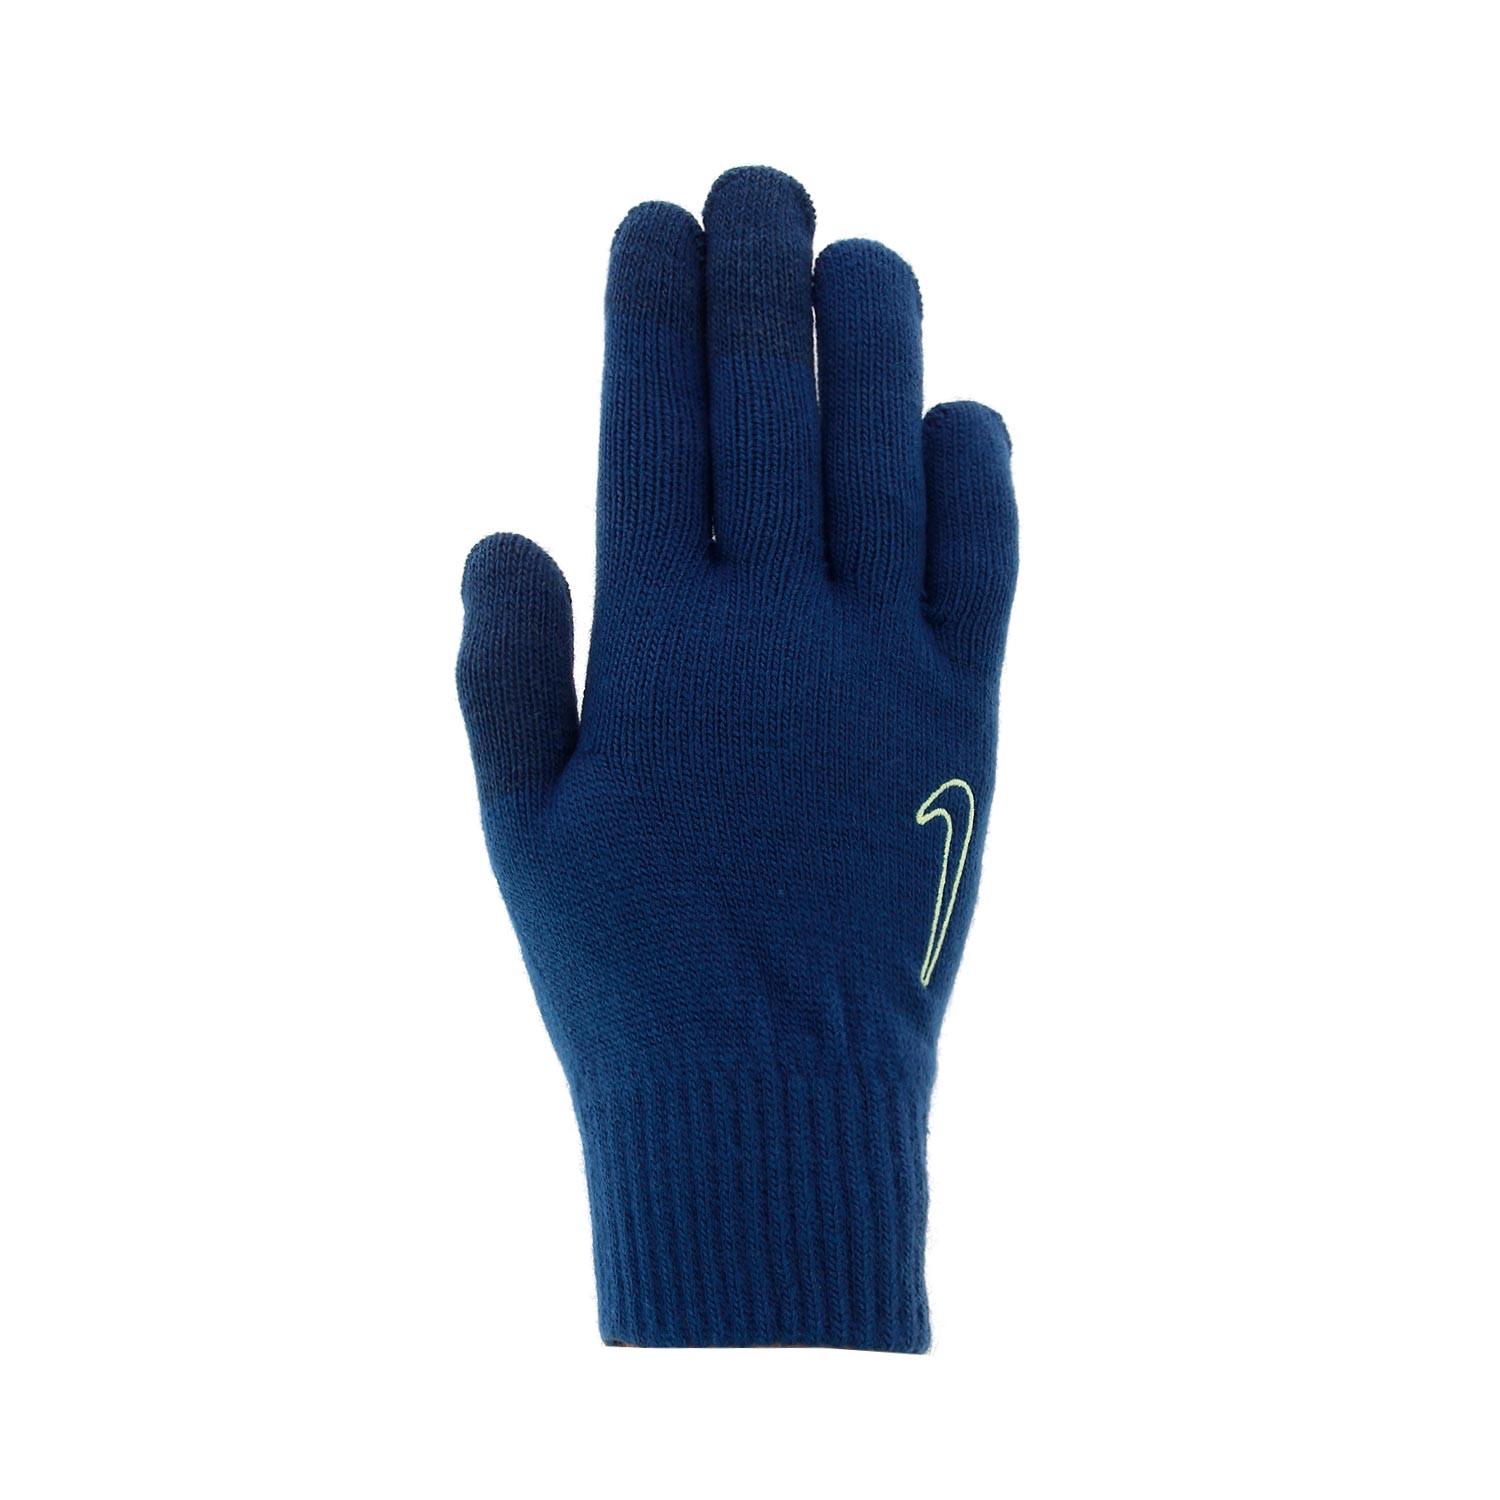 Guantes Nike Knit Tech and TG 2.0 azules |